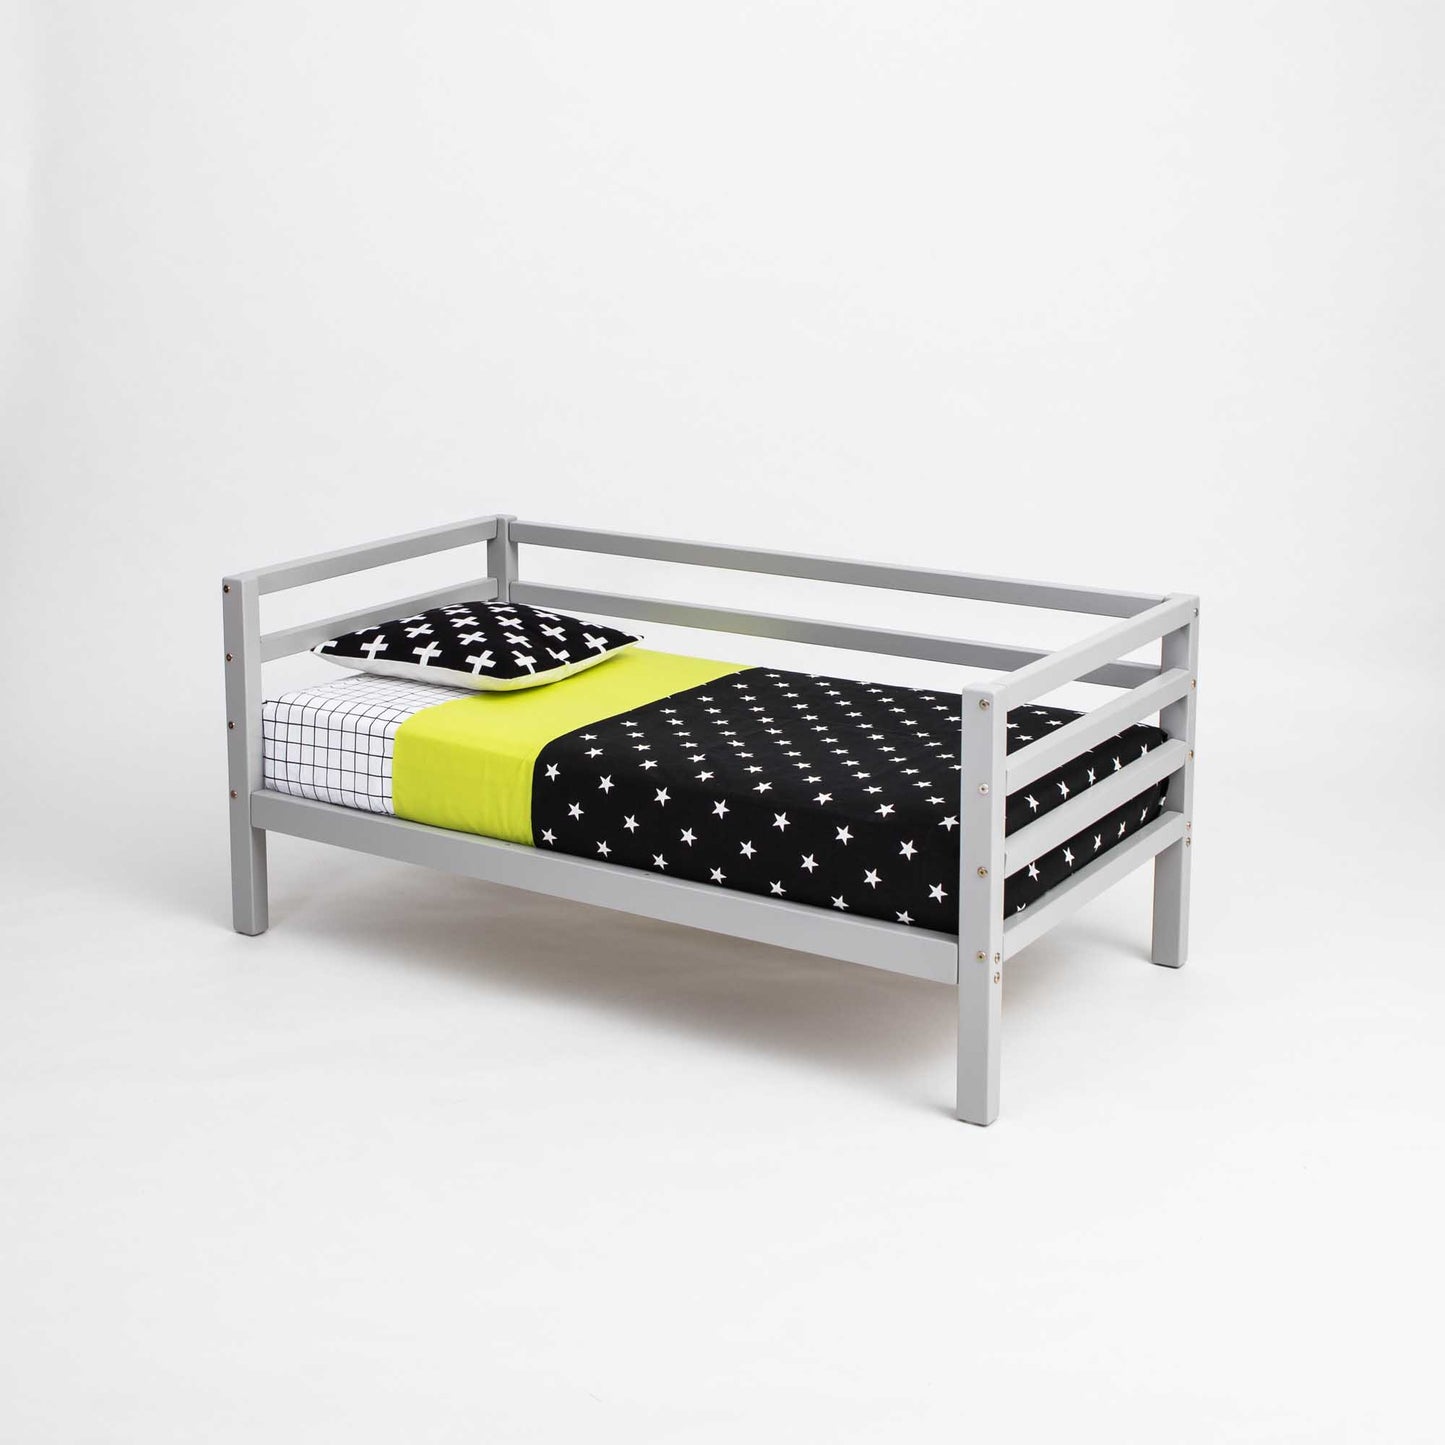 2-in-1 transformable kids' bed with a 3-sided horizontal rail